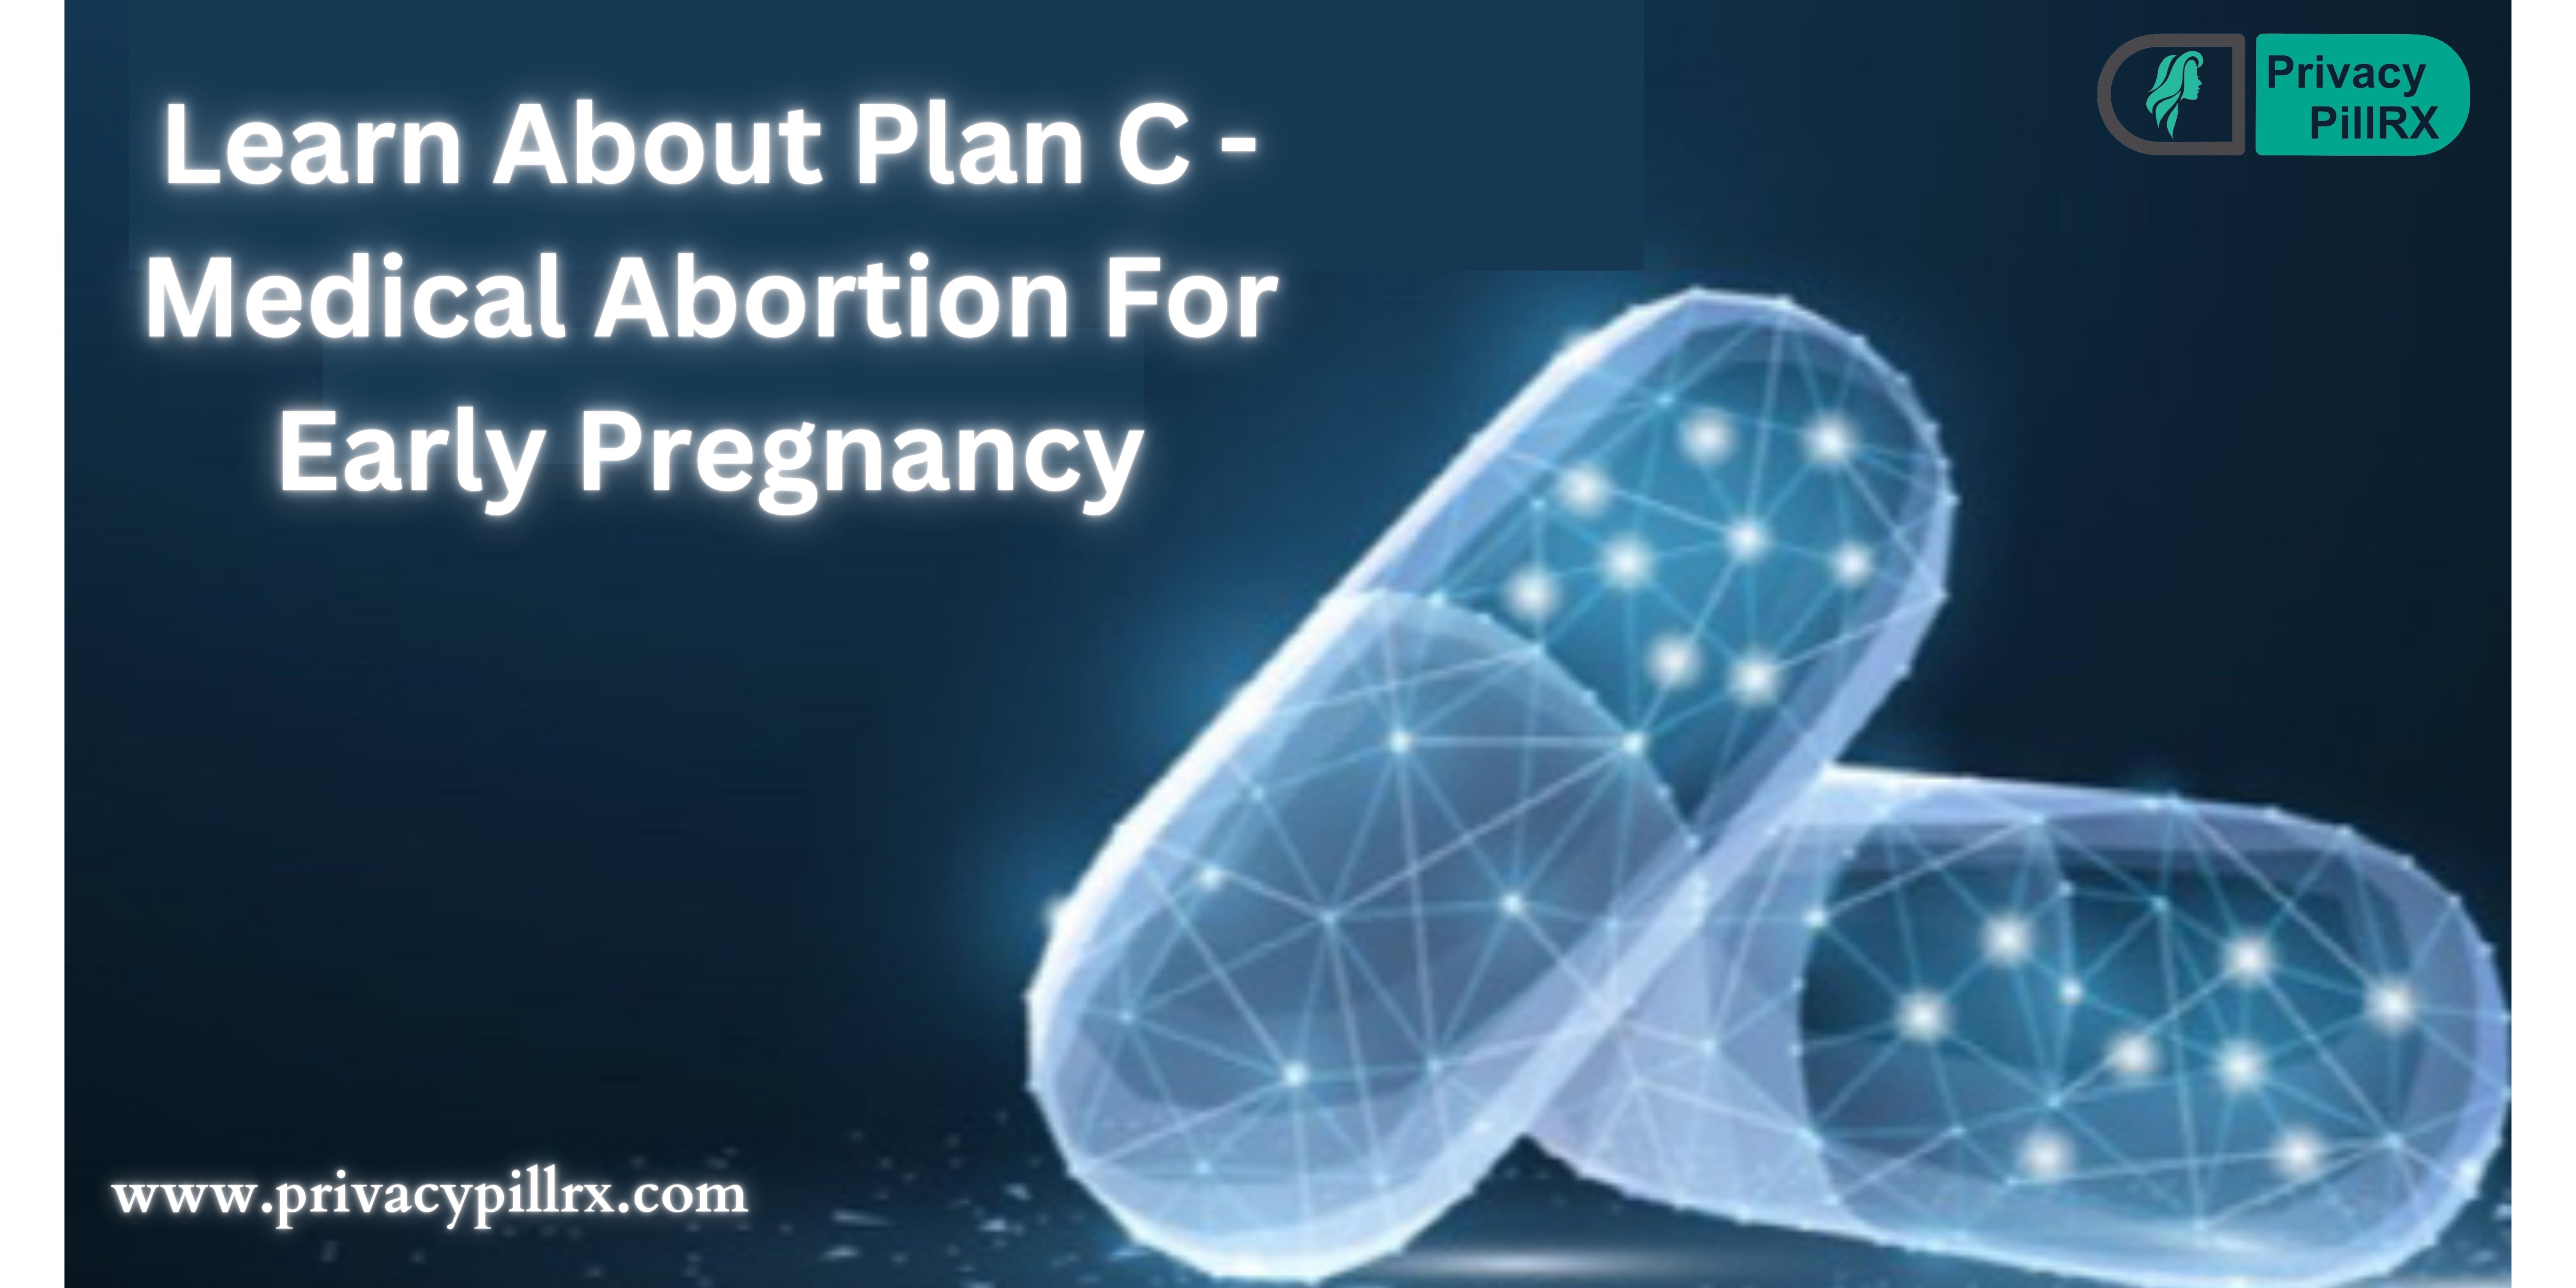 Learn About Plan C - Medical Abortion For Early Pregnancy - photo